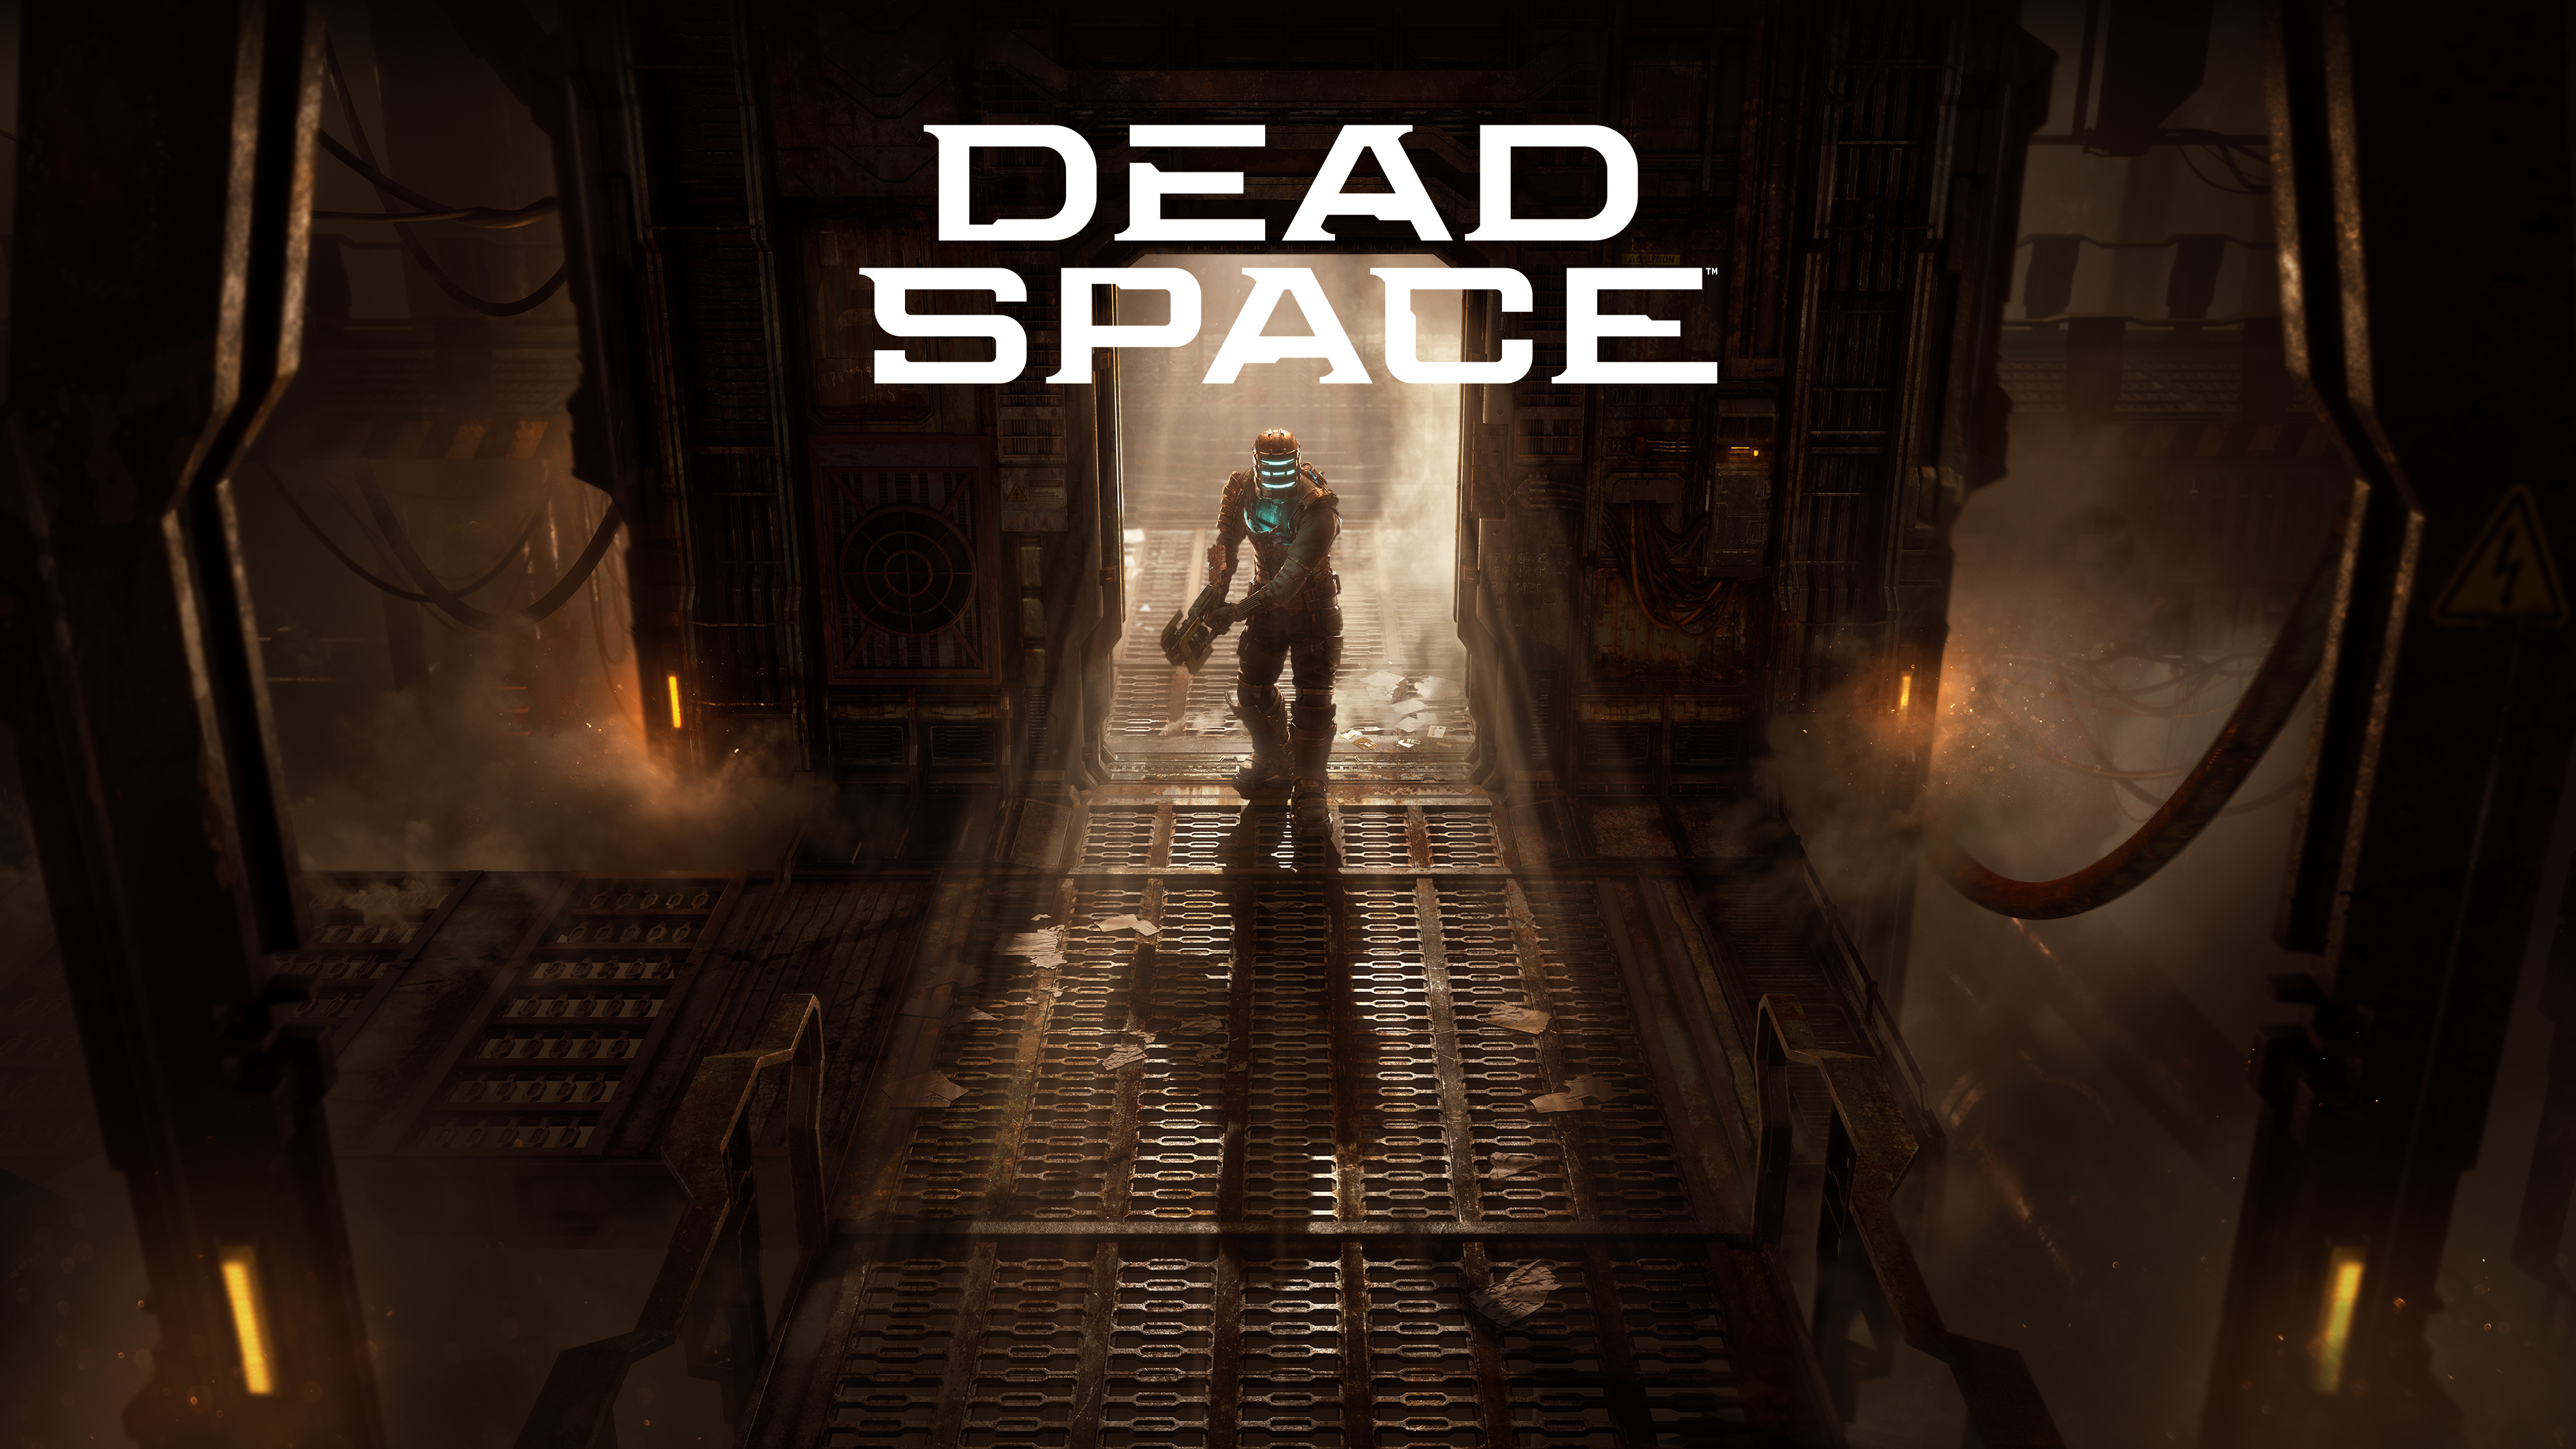 Dead space remake game. Дед Спейс 2 ремейк. Деад Спейс 1 ремейк. Dead Space (игра, 2023). Dead Space Remake ps5.